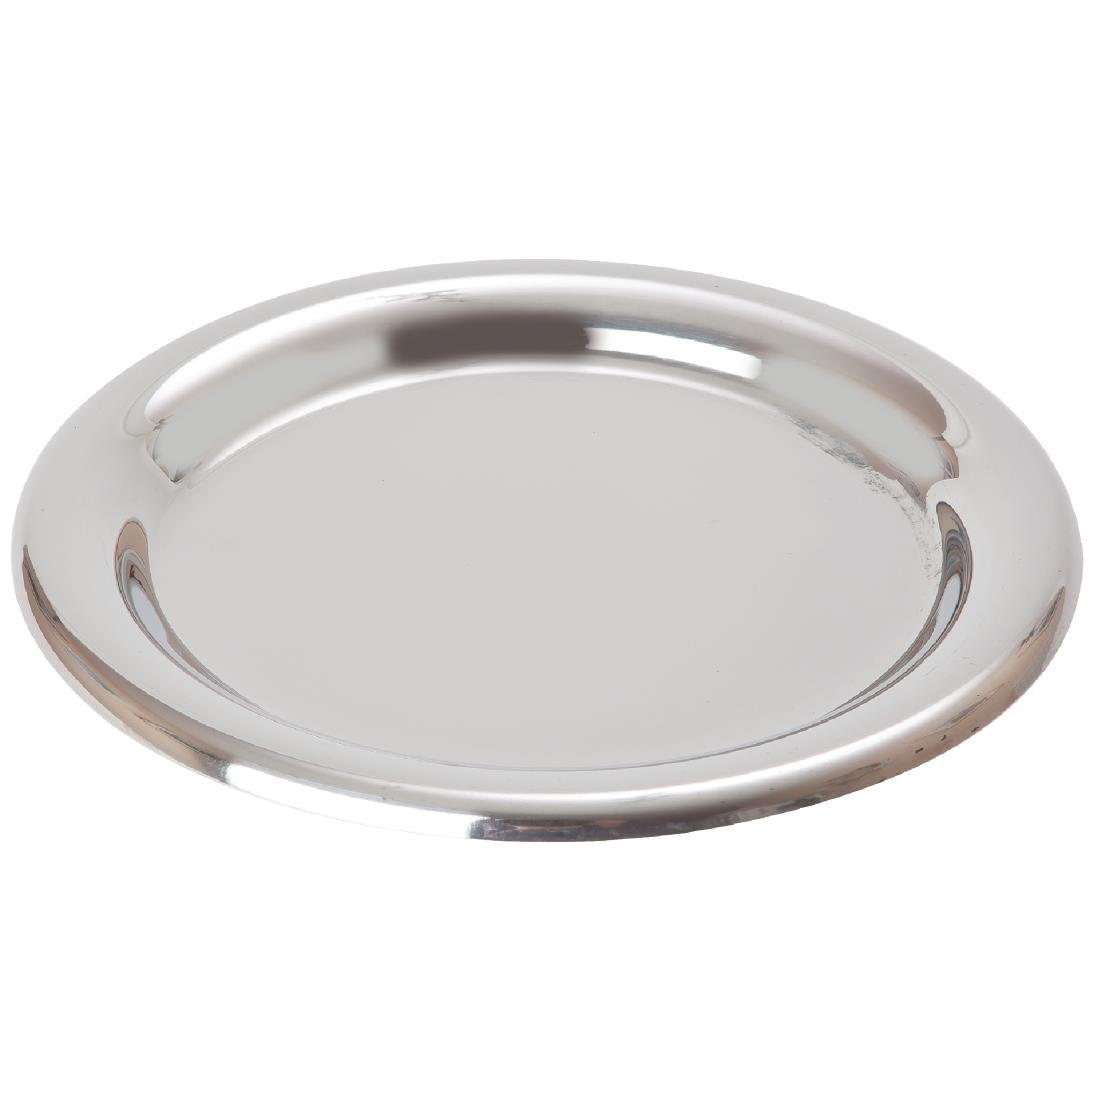 CJ988 Beaumont Stainless Steel Tip Tray